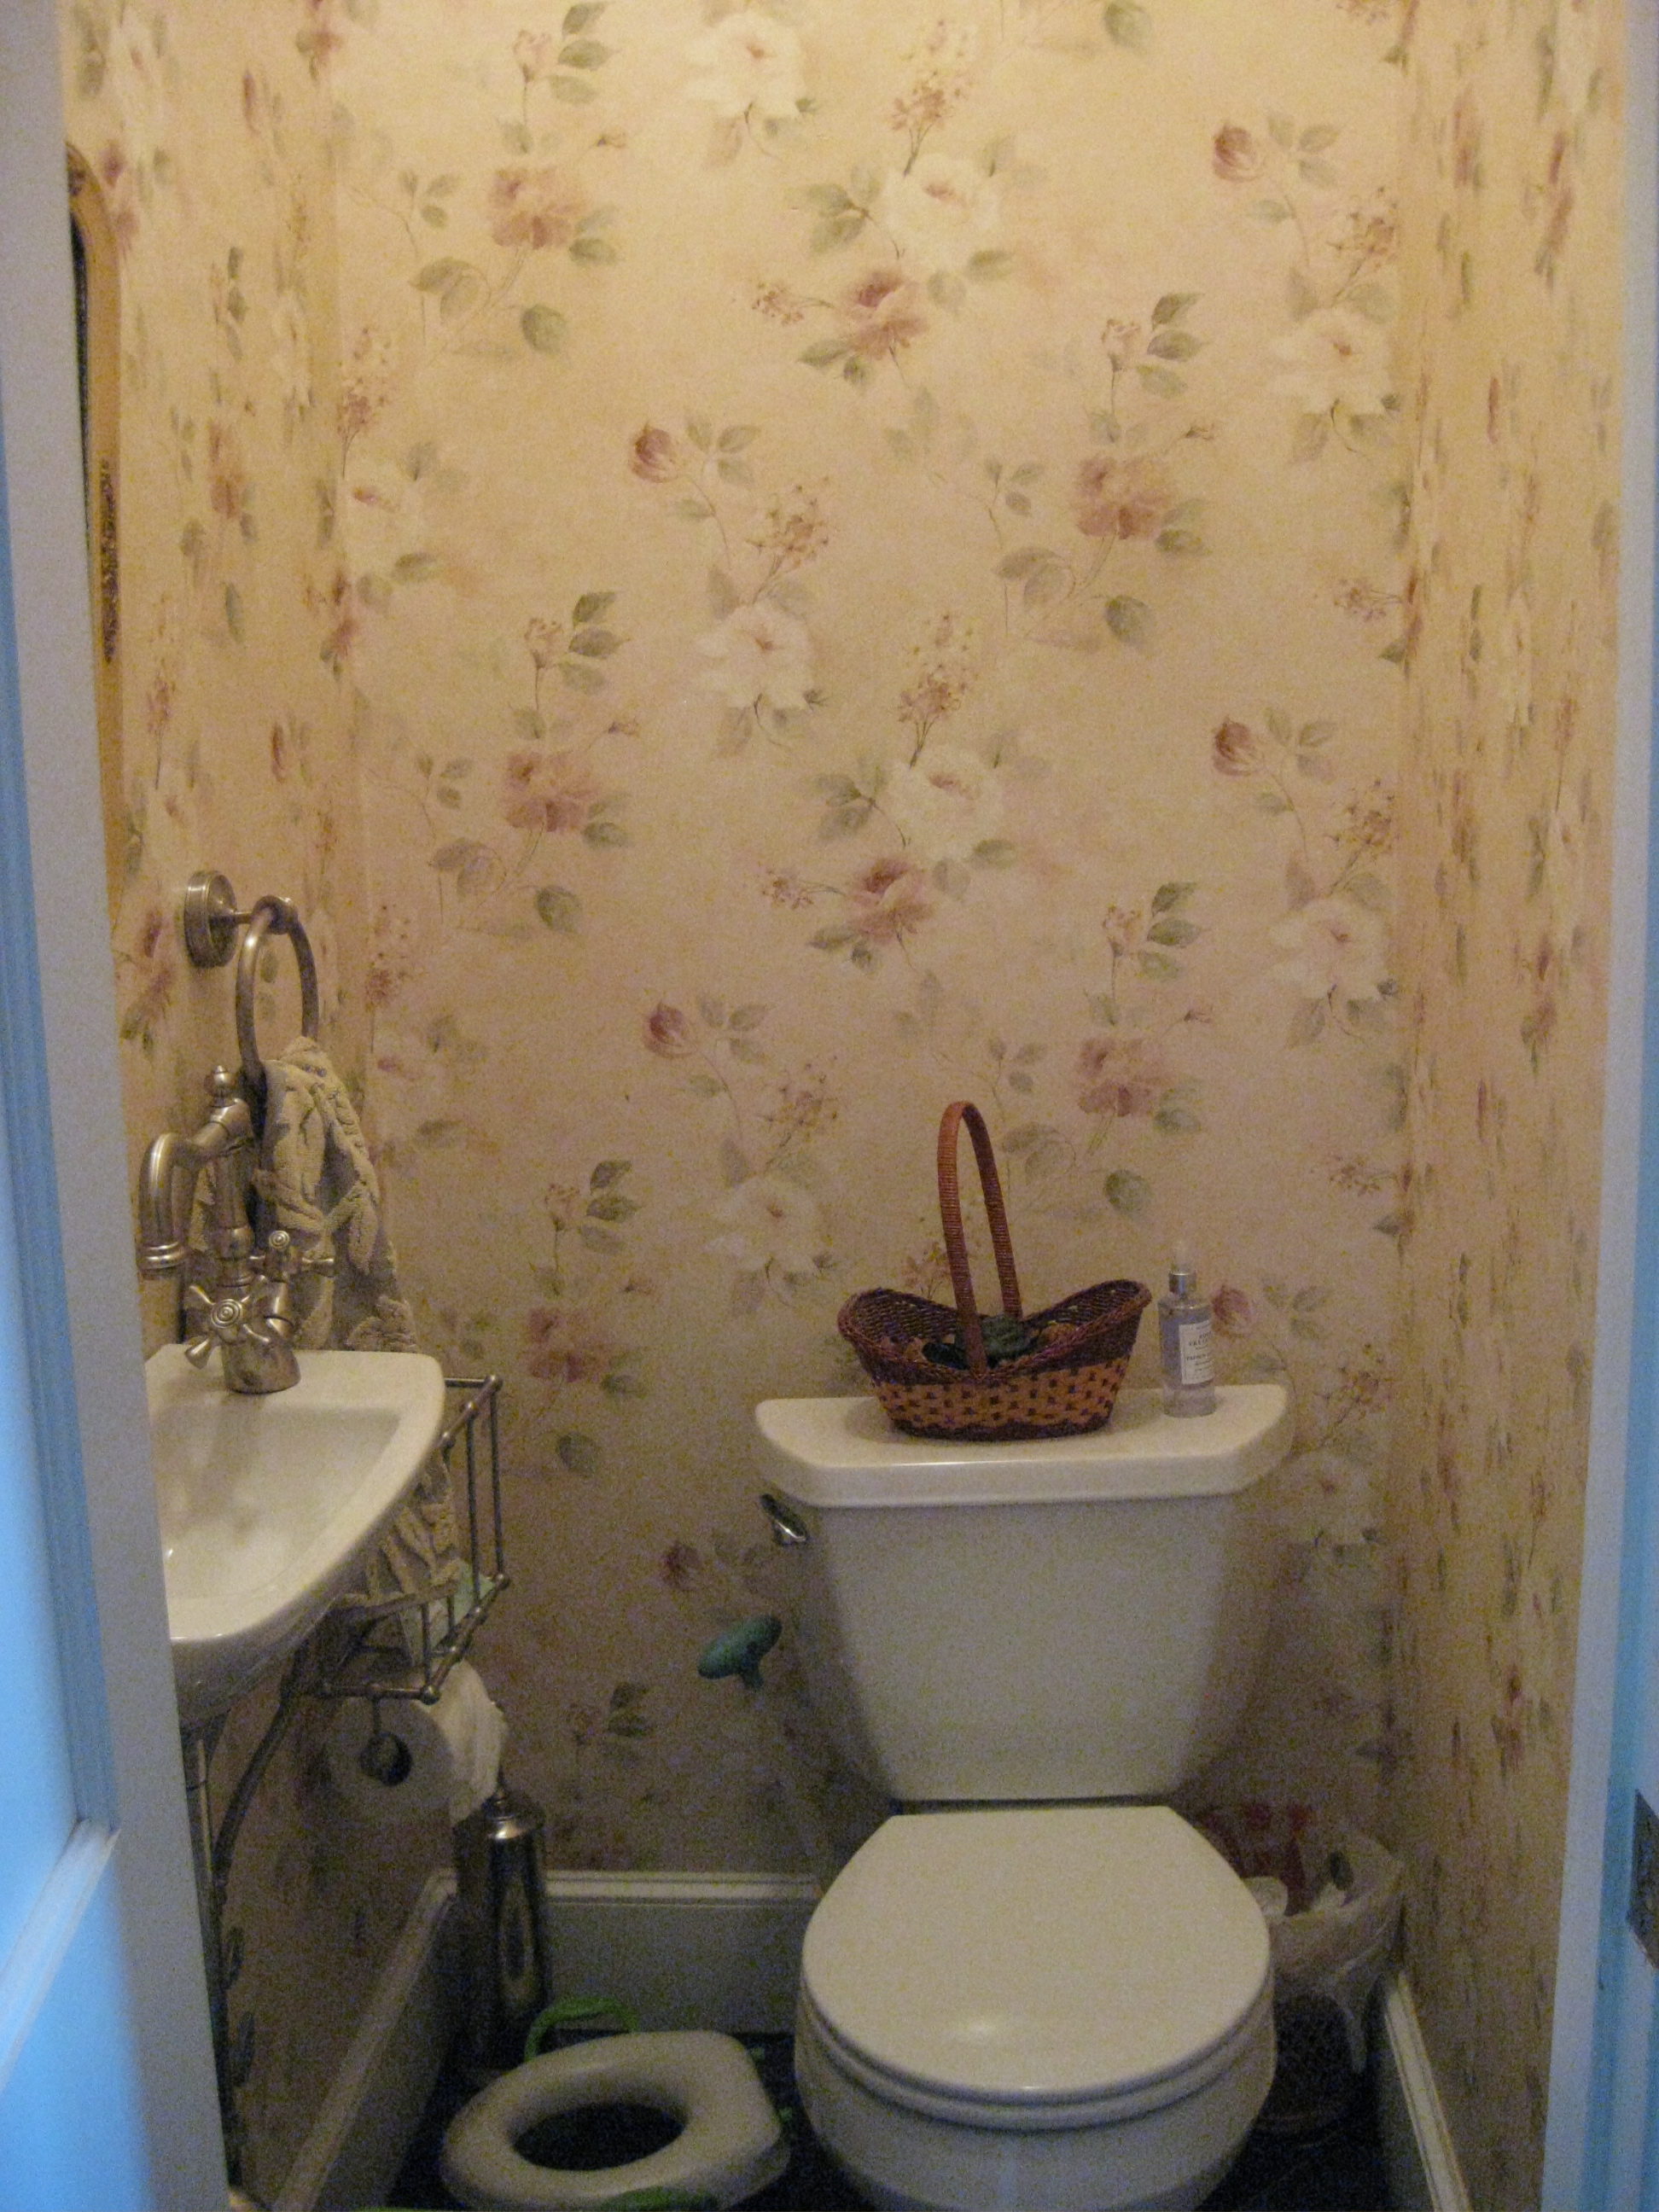 Take Her Tiny First Floor Powder Room The Wallpaper Was Lovely And